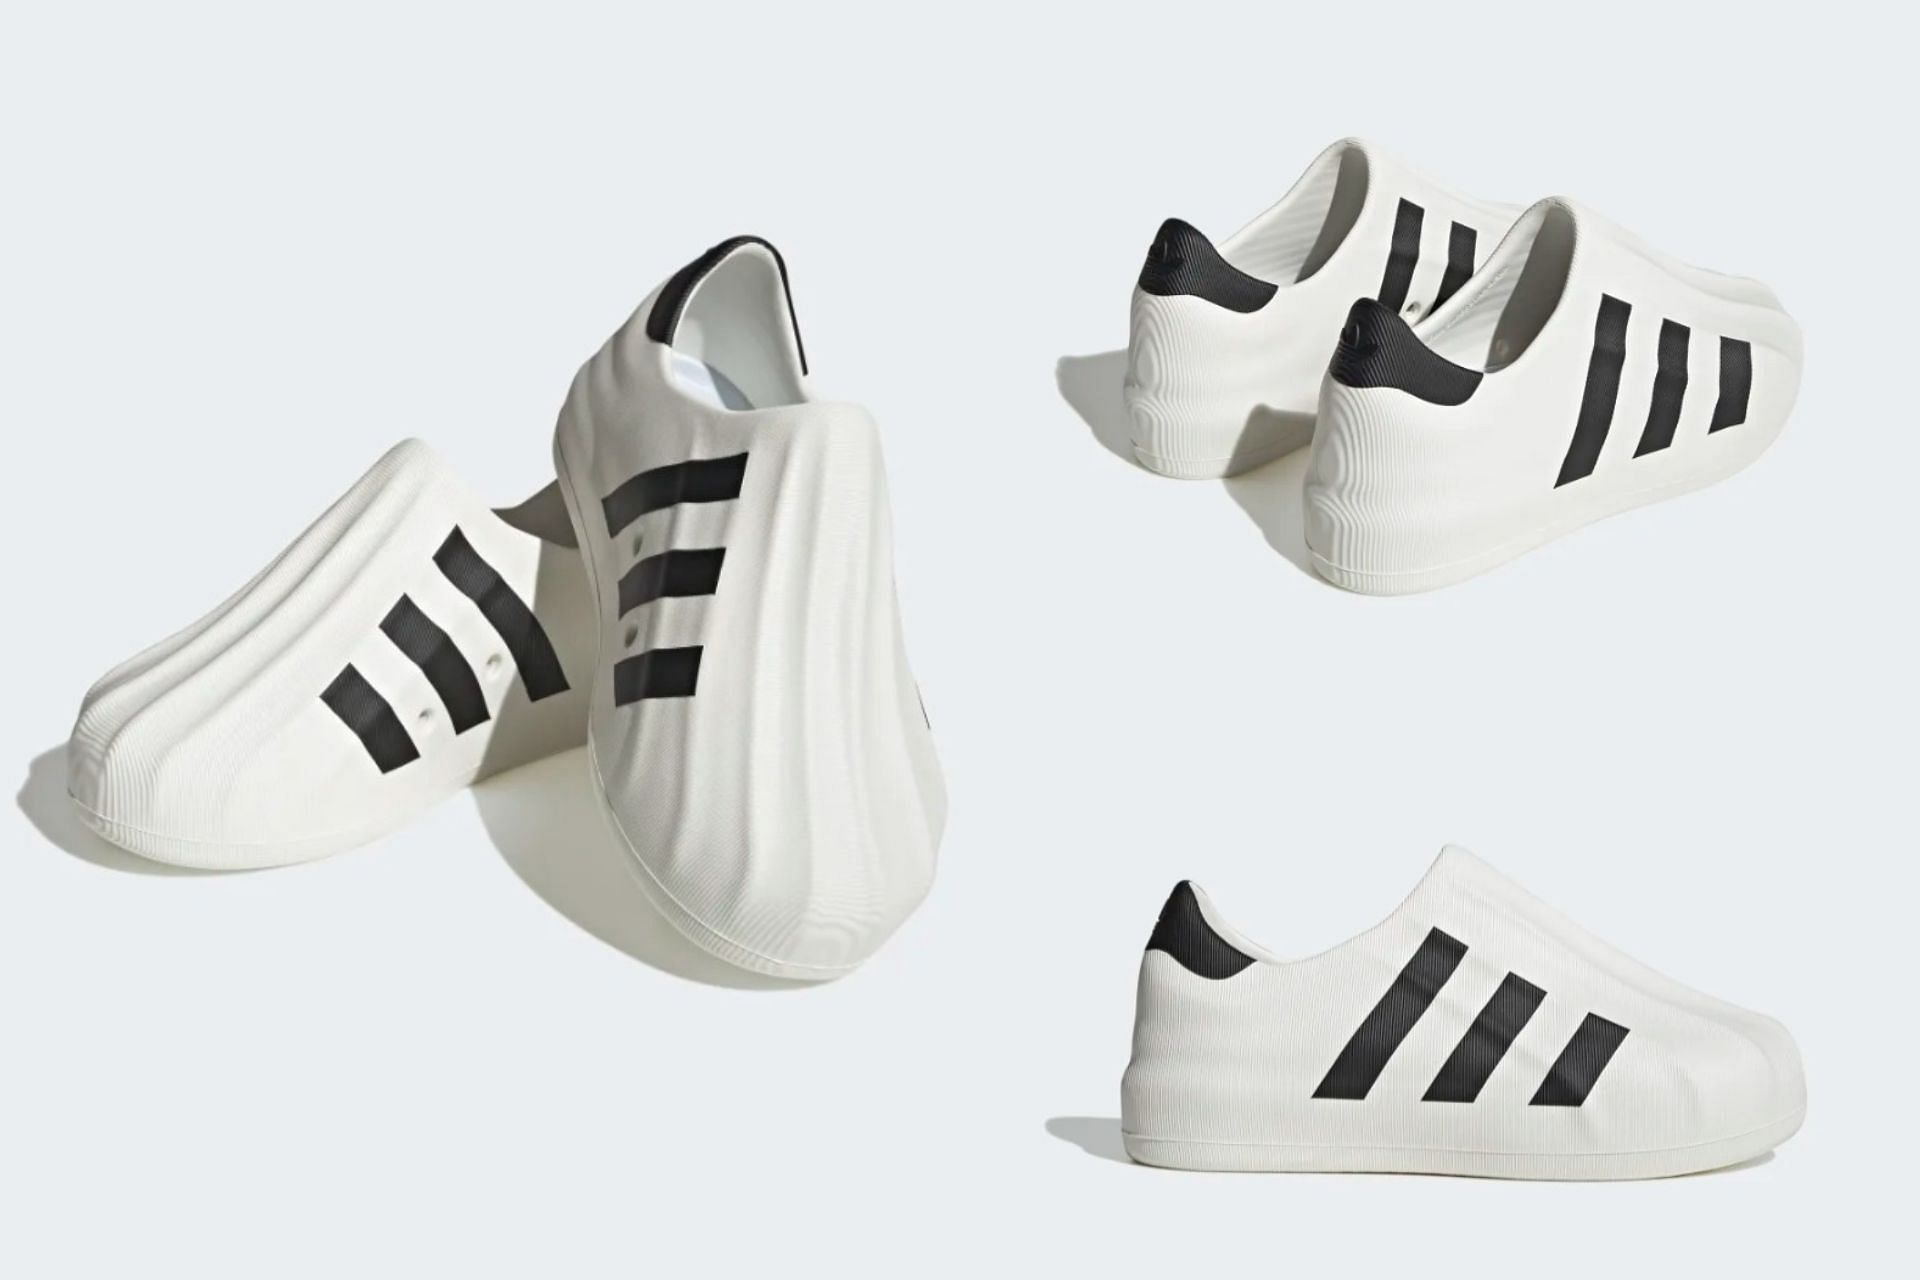 Adidas Adifom Superstar shoes: Where to buy, price, and more details  explored